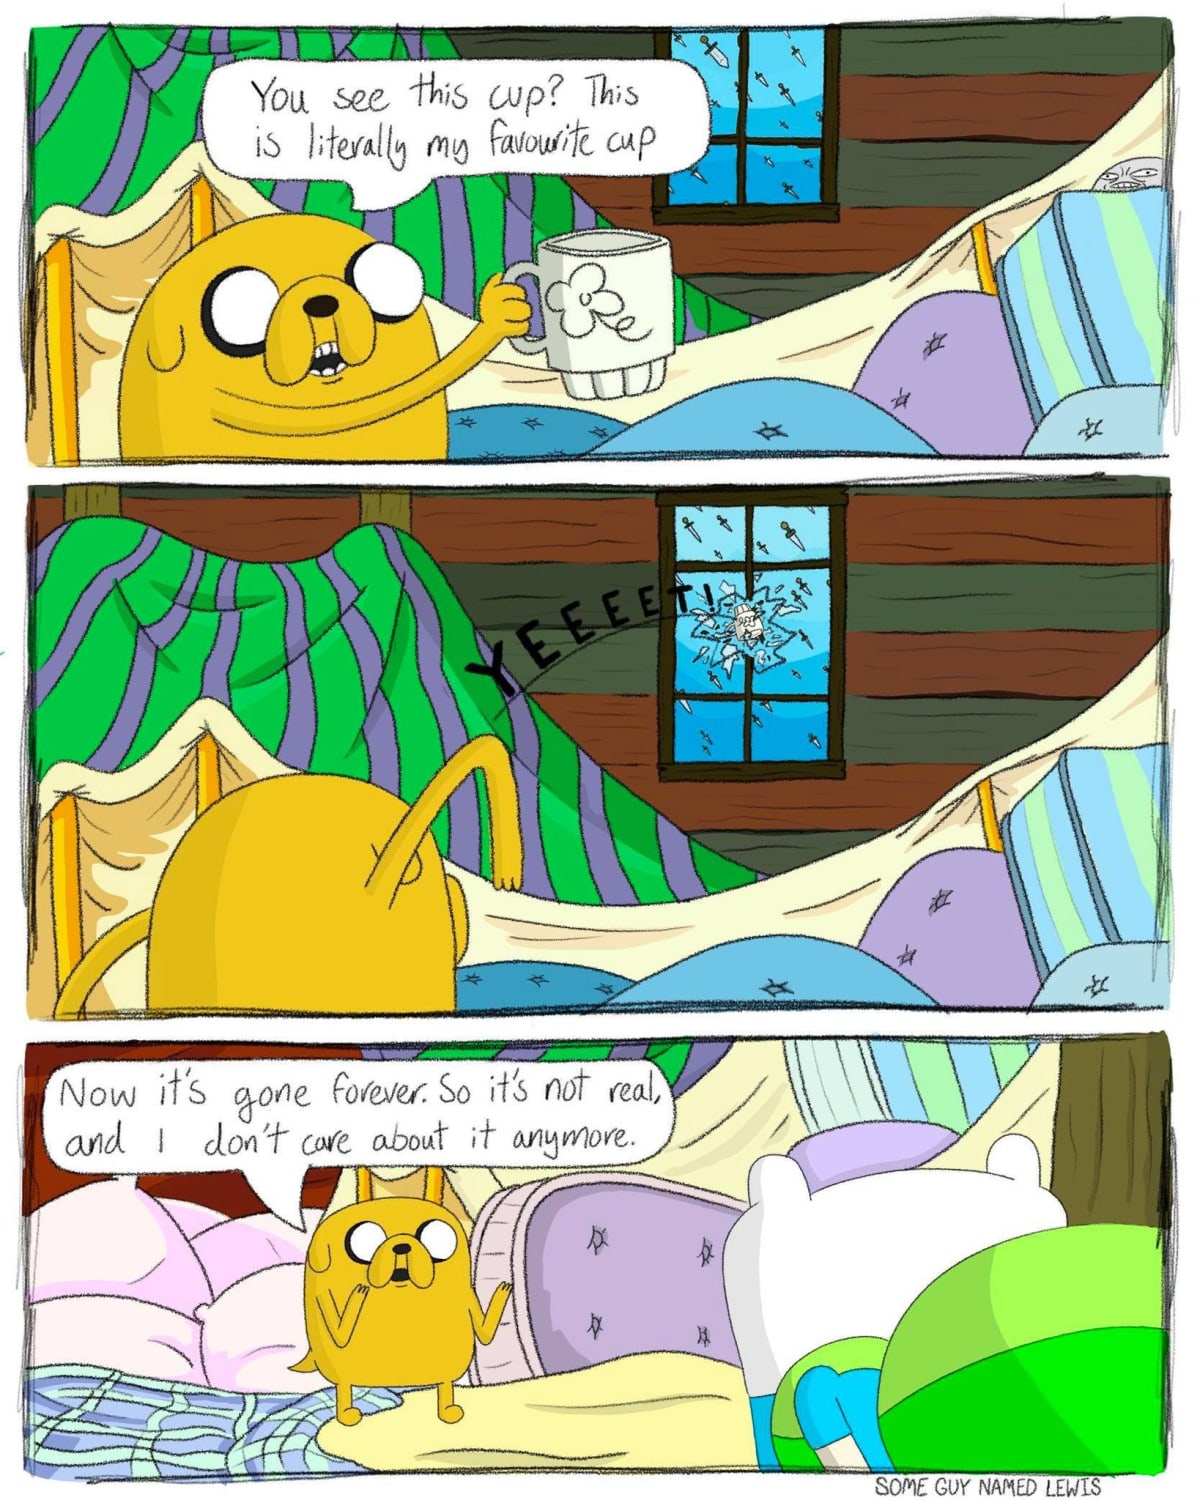 Made a comic strip out of one of my favourite Adventure Time moments